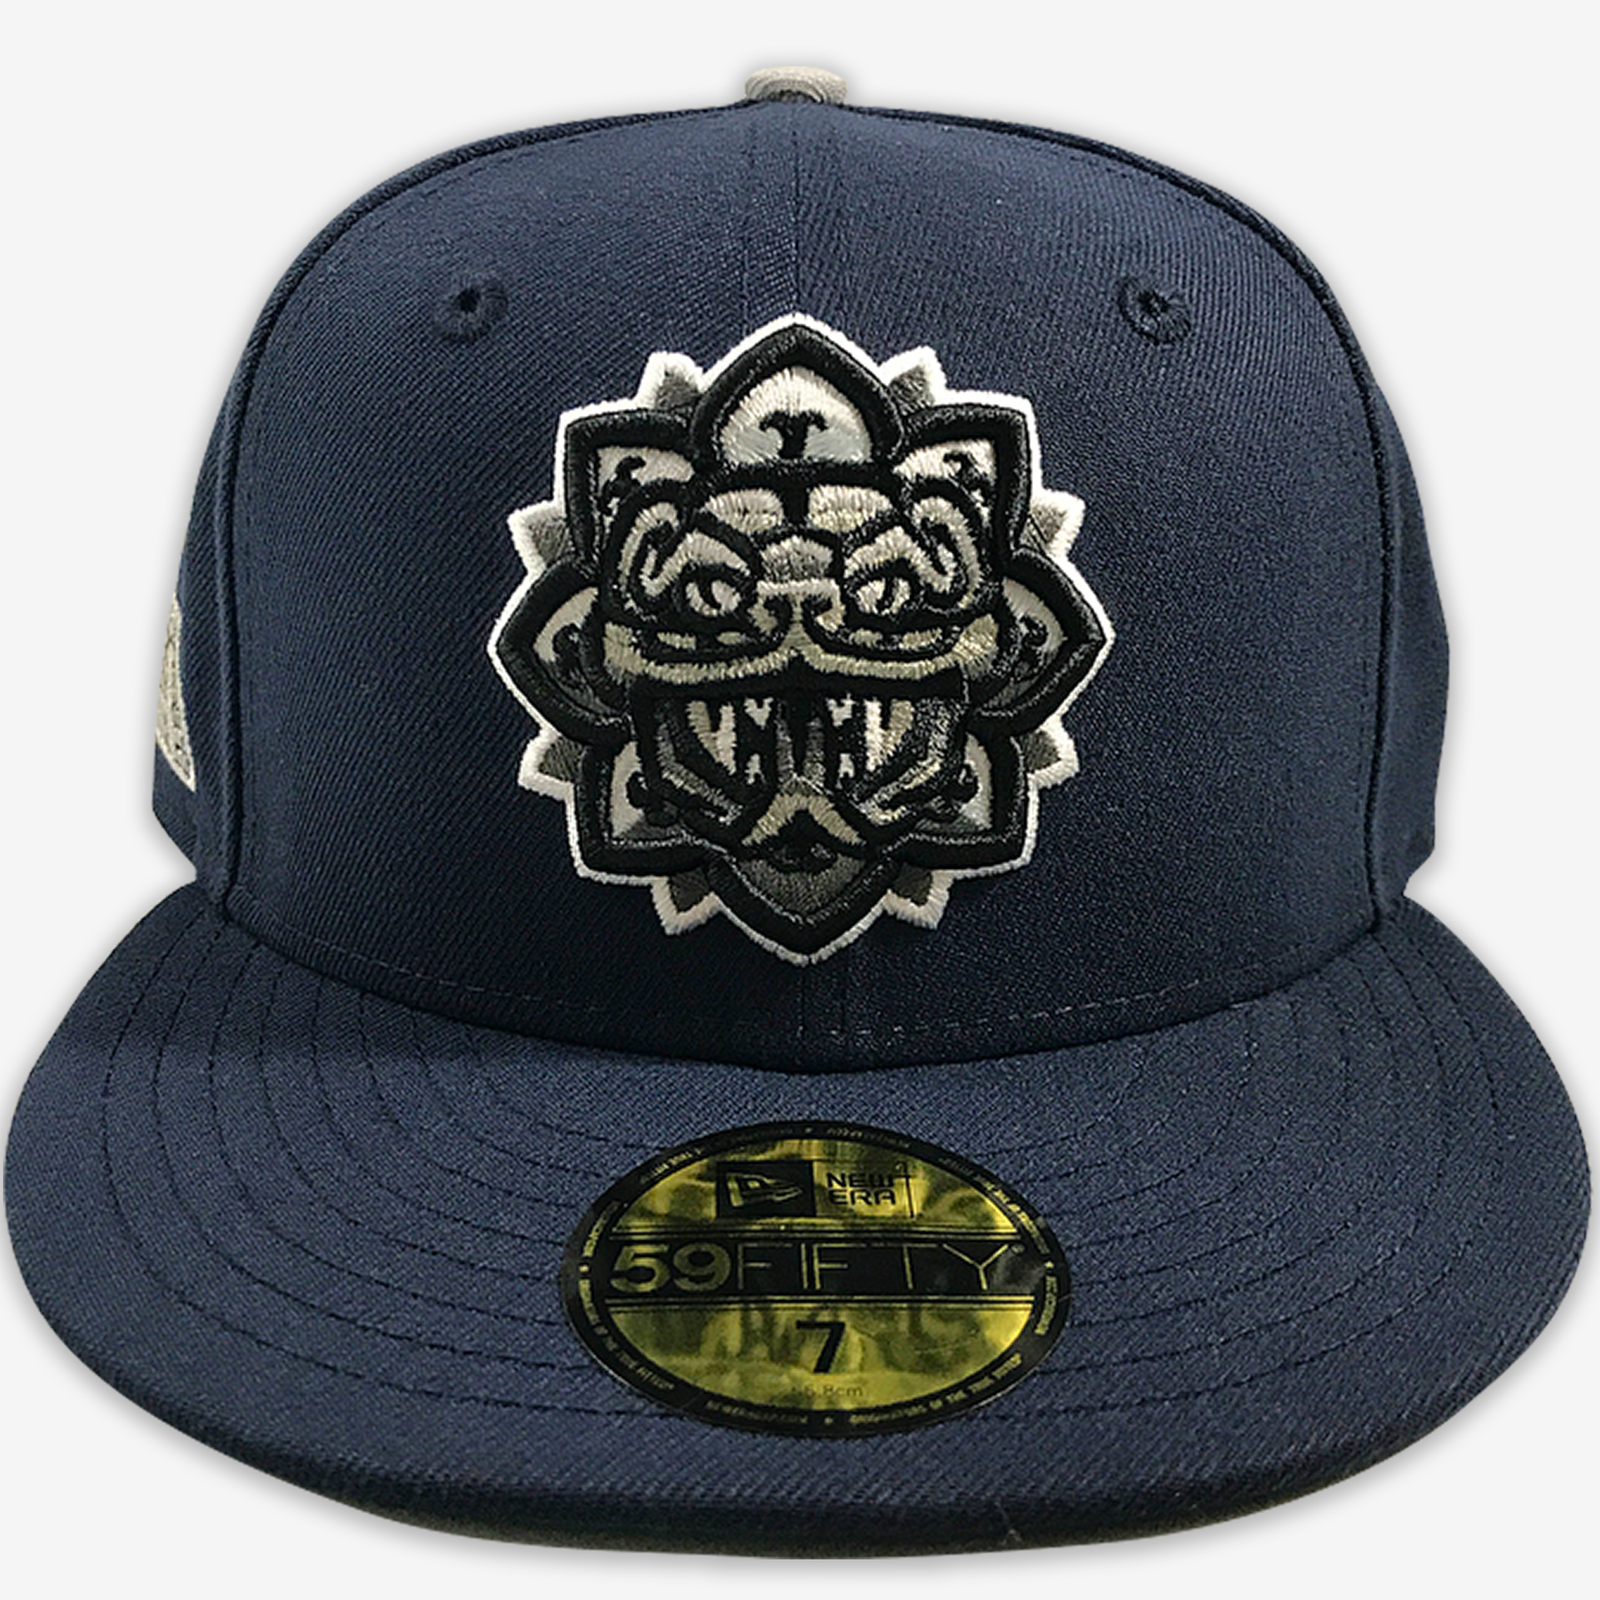 AOF x RCG Quetzalcoatl New Era Fitted